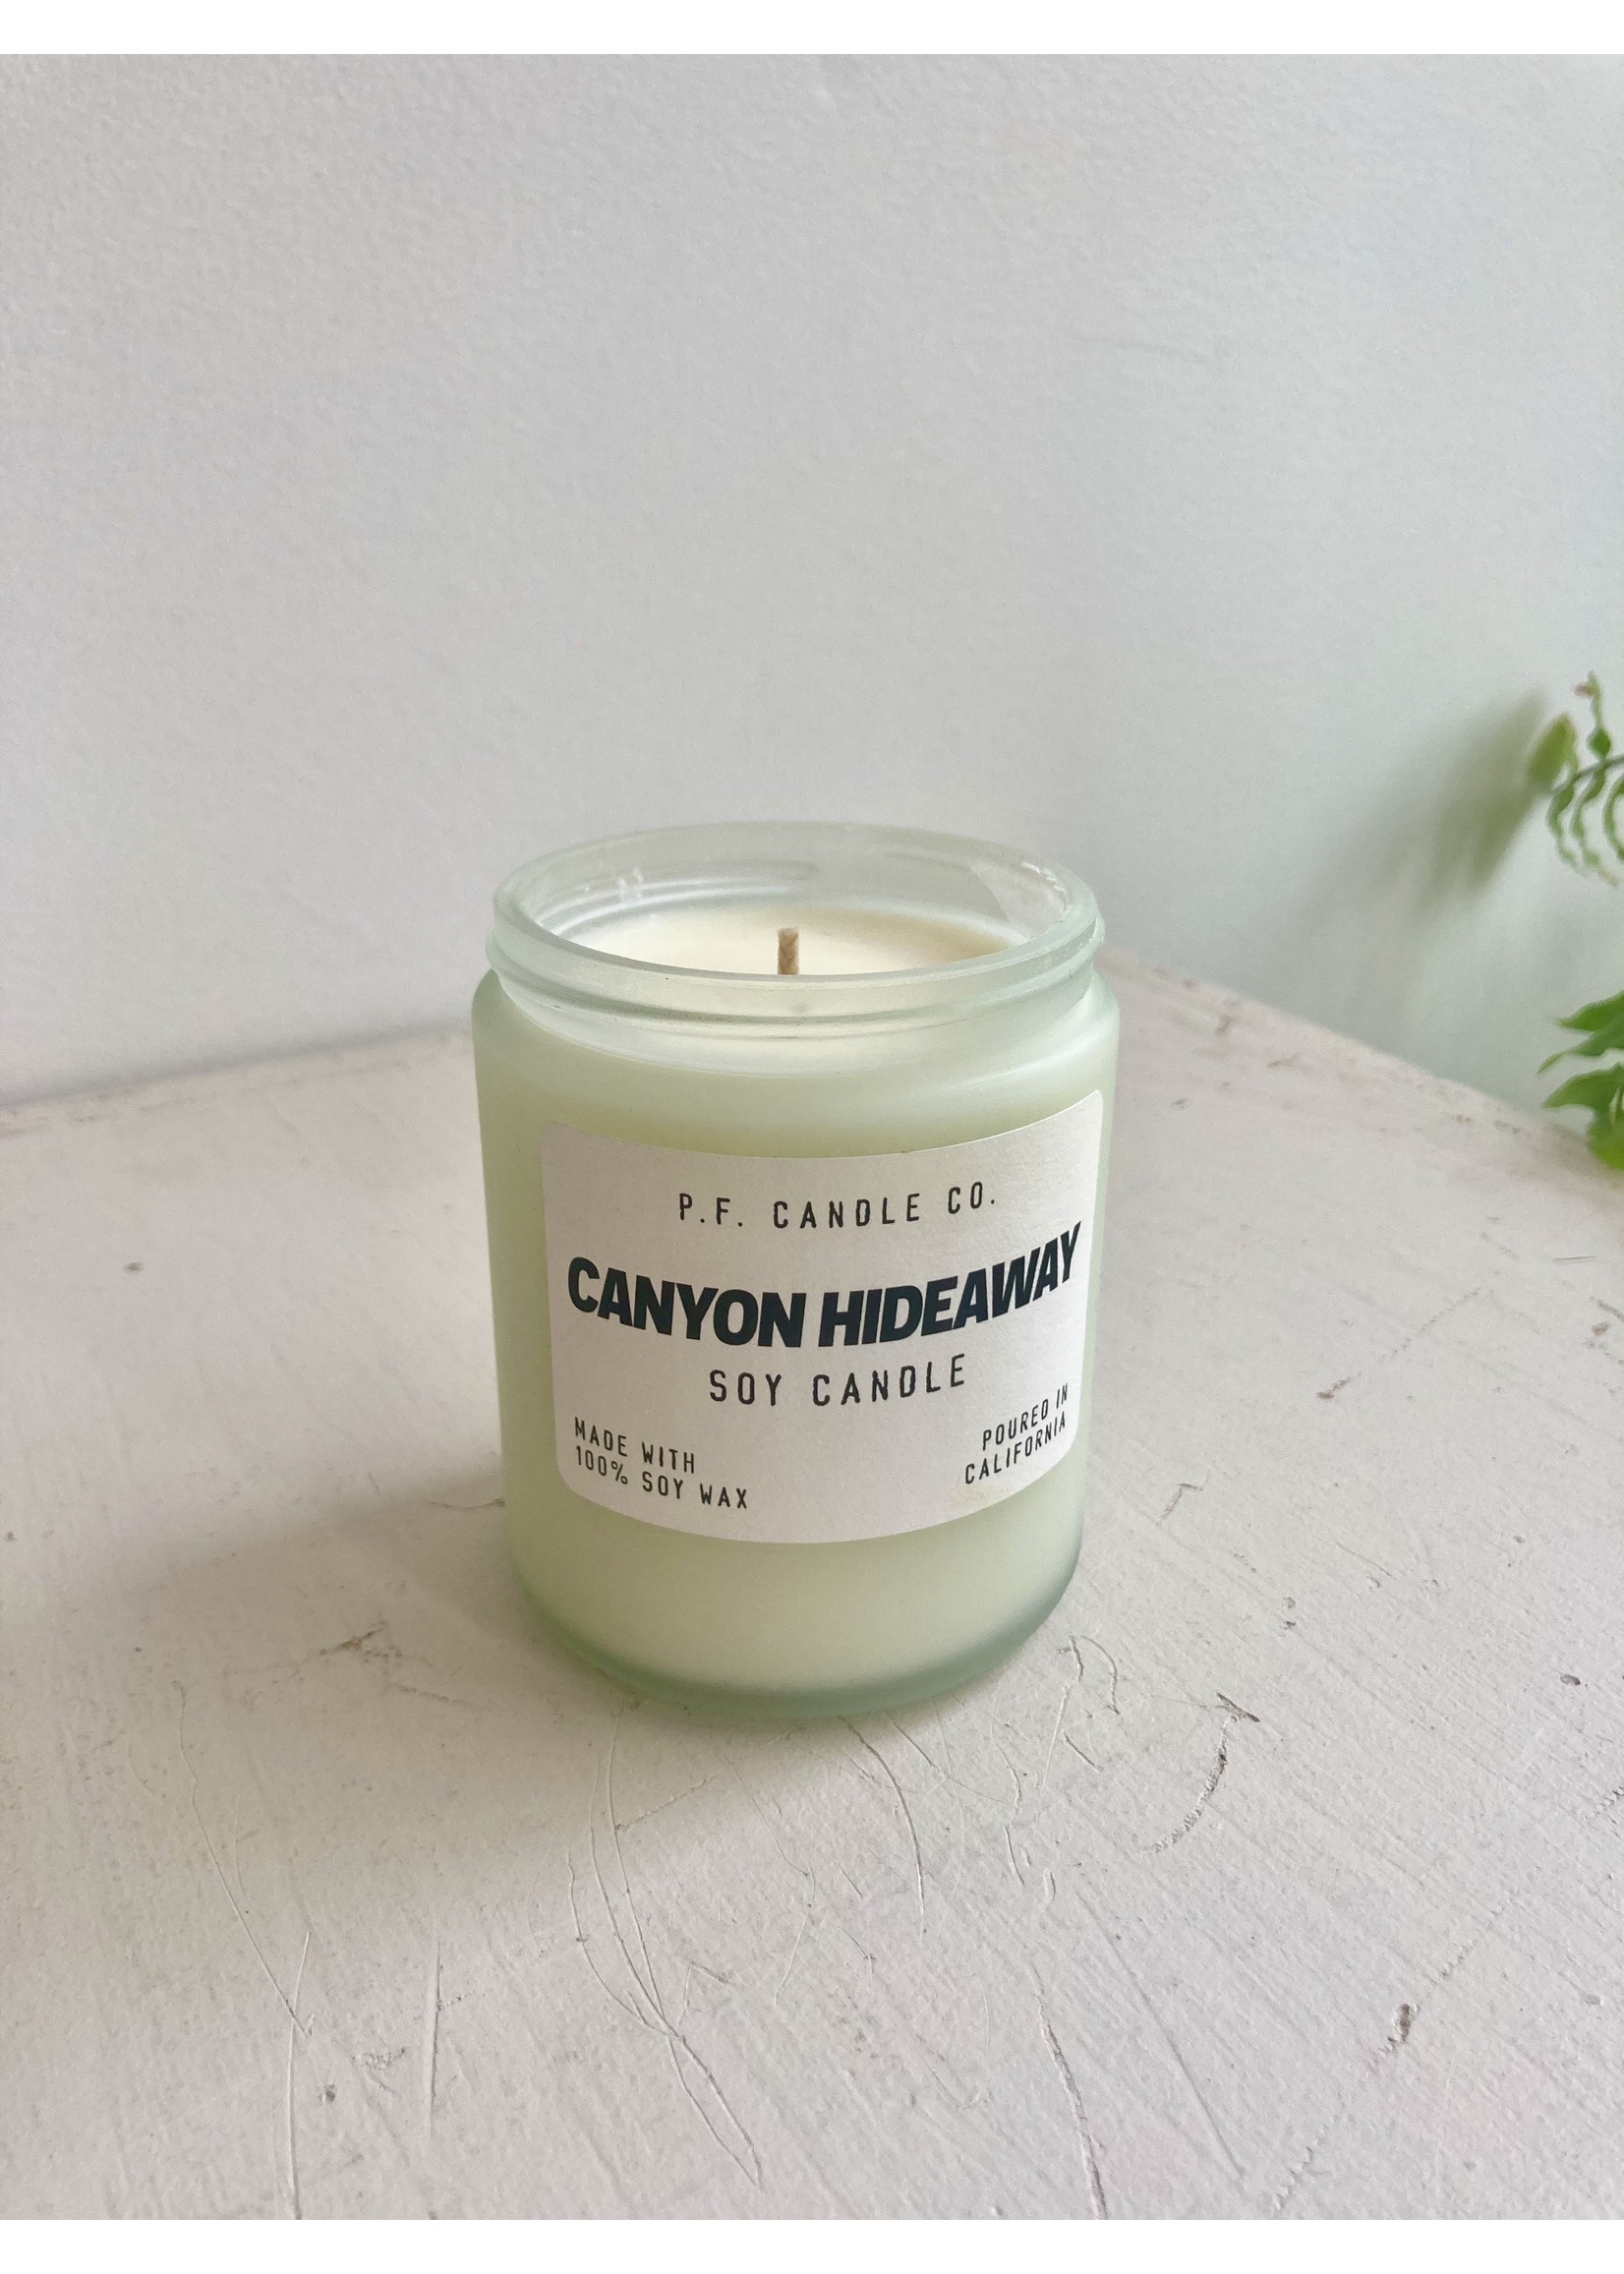 P.F. Candle Co 7.2oz Soy Candle by P.F. Candle Co